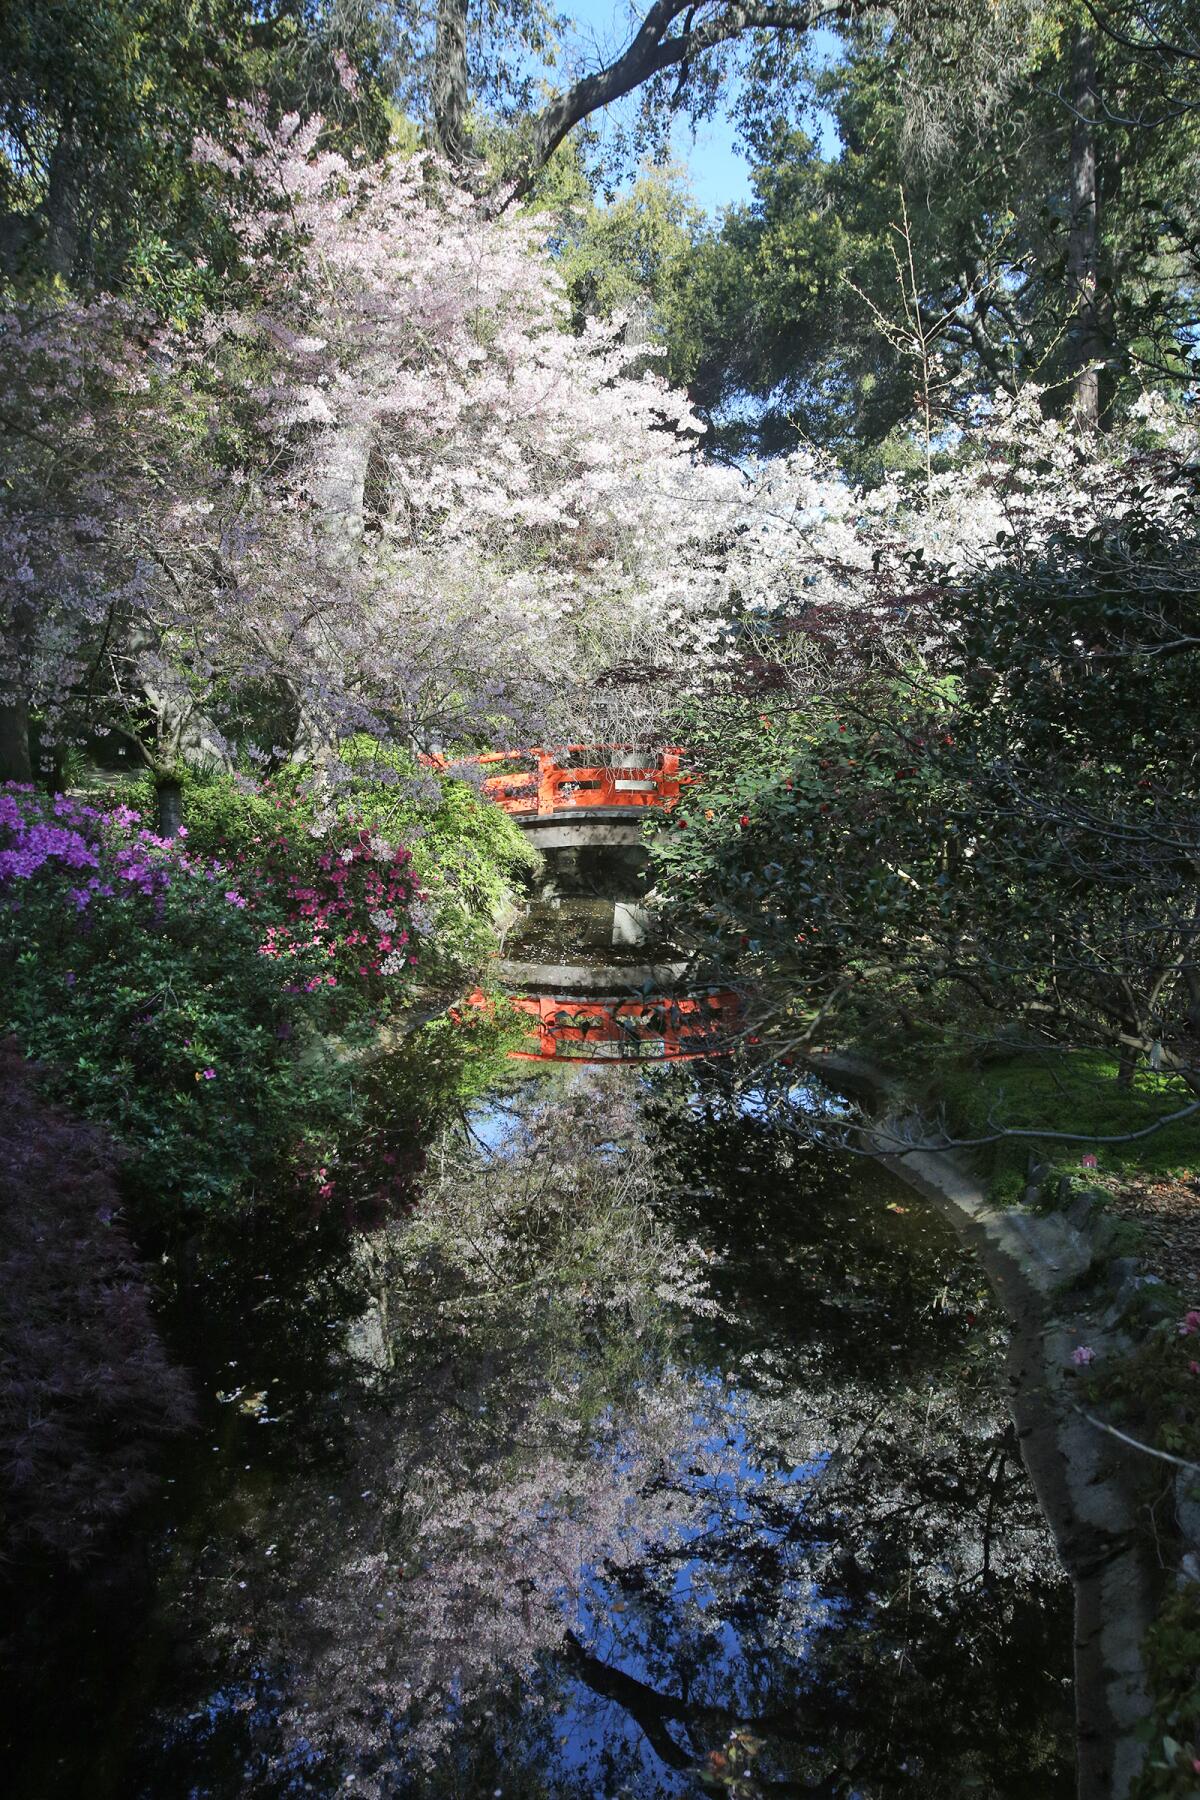 Beni hoshi and Akebono cherry blossoms at Descanso Gardens on March 25. The blossoms will be featured on one of the virtual tours of the gardens that have proven to be very popular during Descanso's closure.